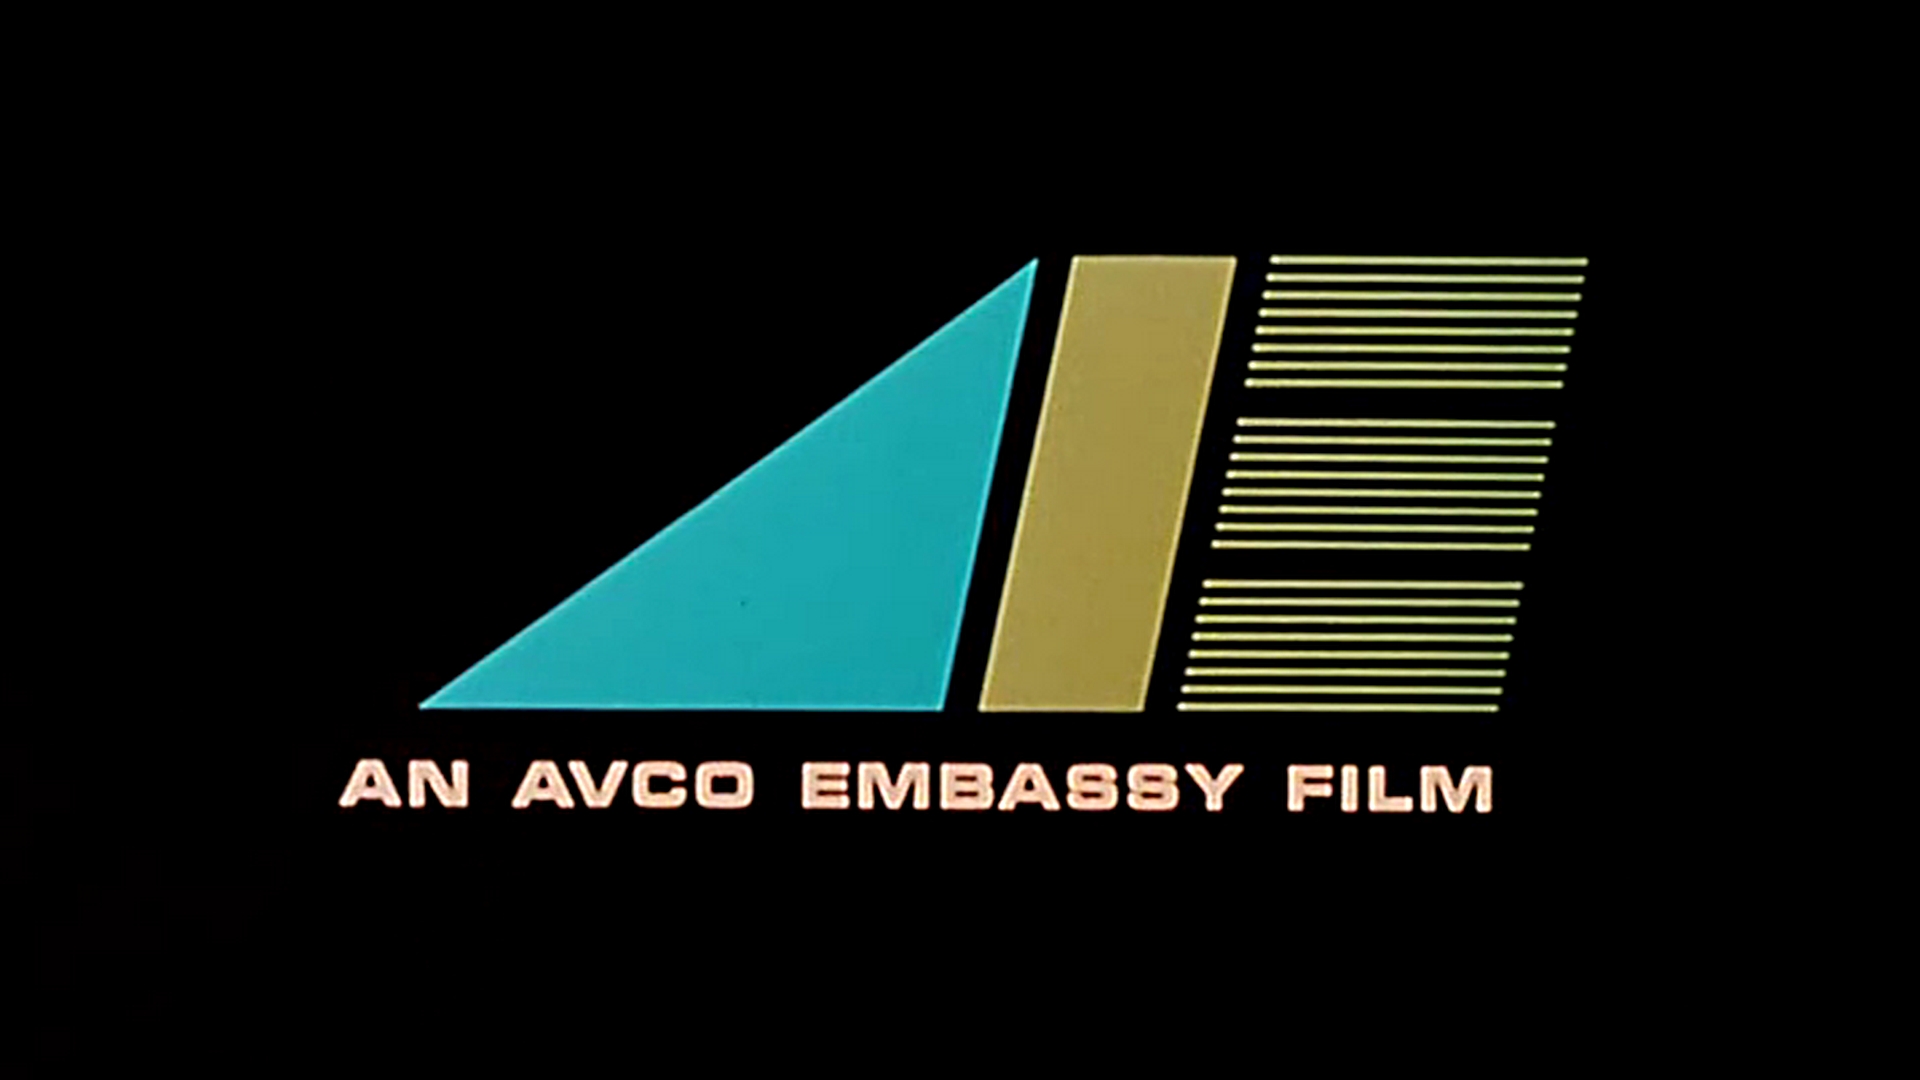 Avco Embassy Pictures (1972) - 16:9